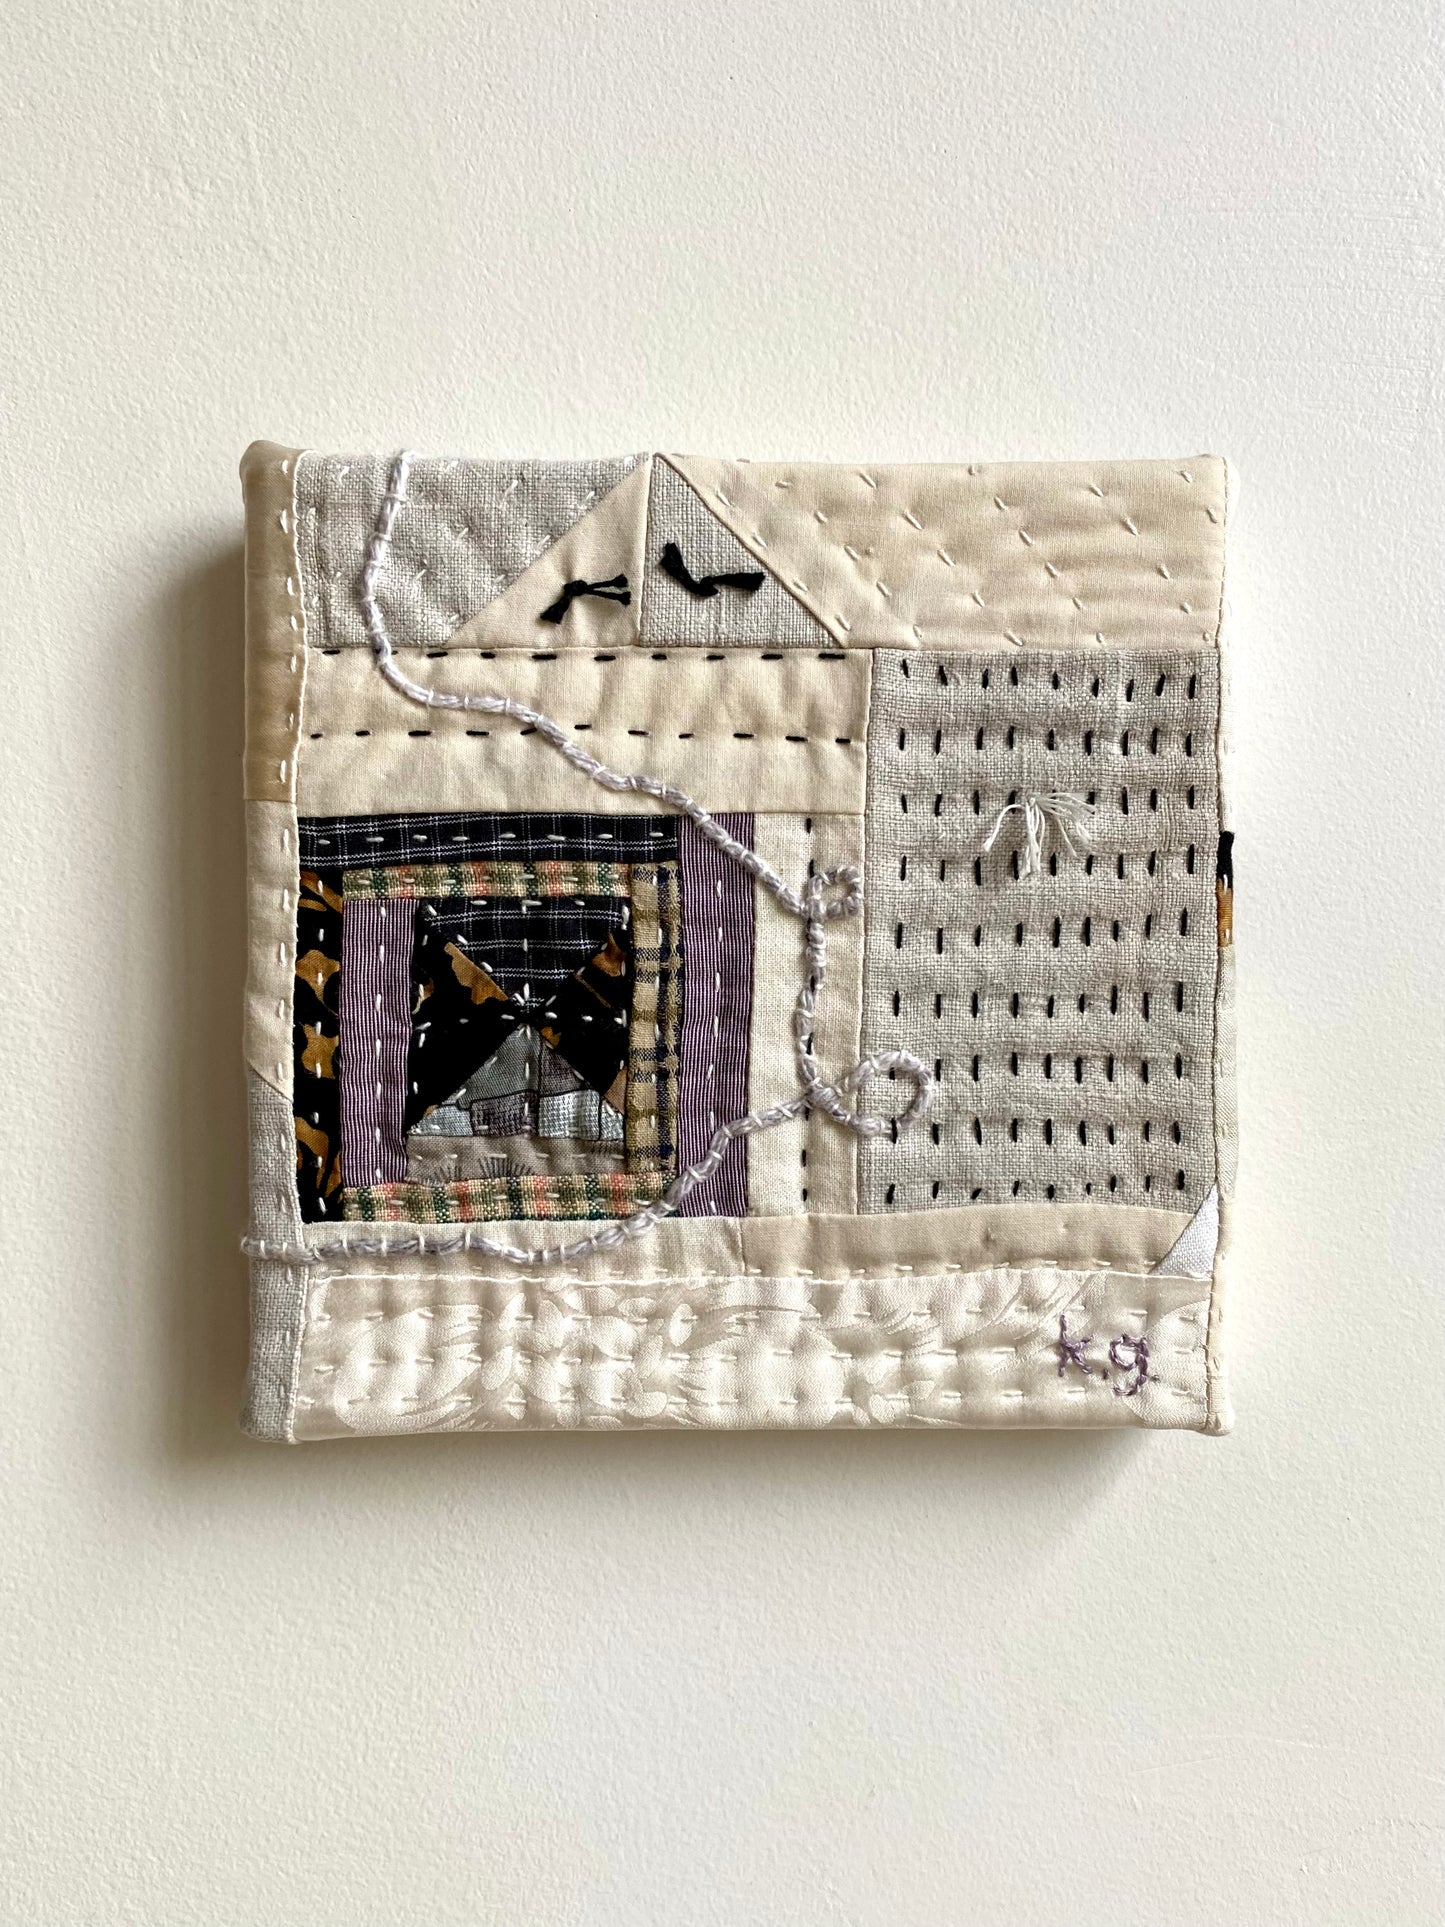 A Different Route Framed Quilt